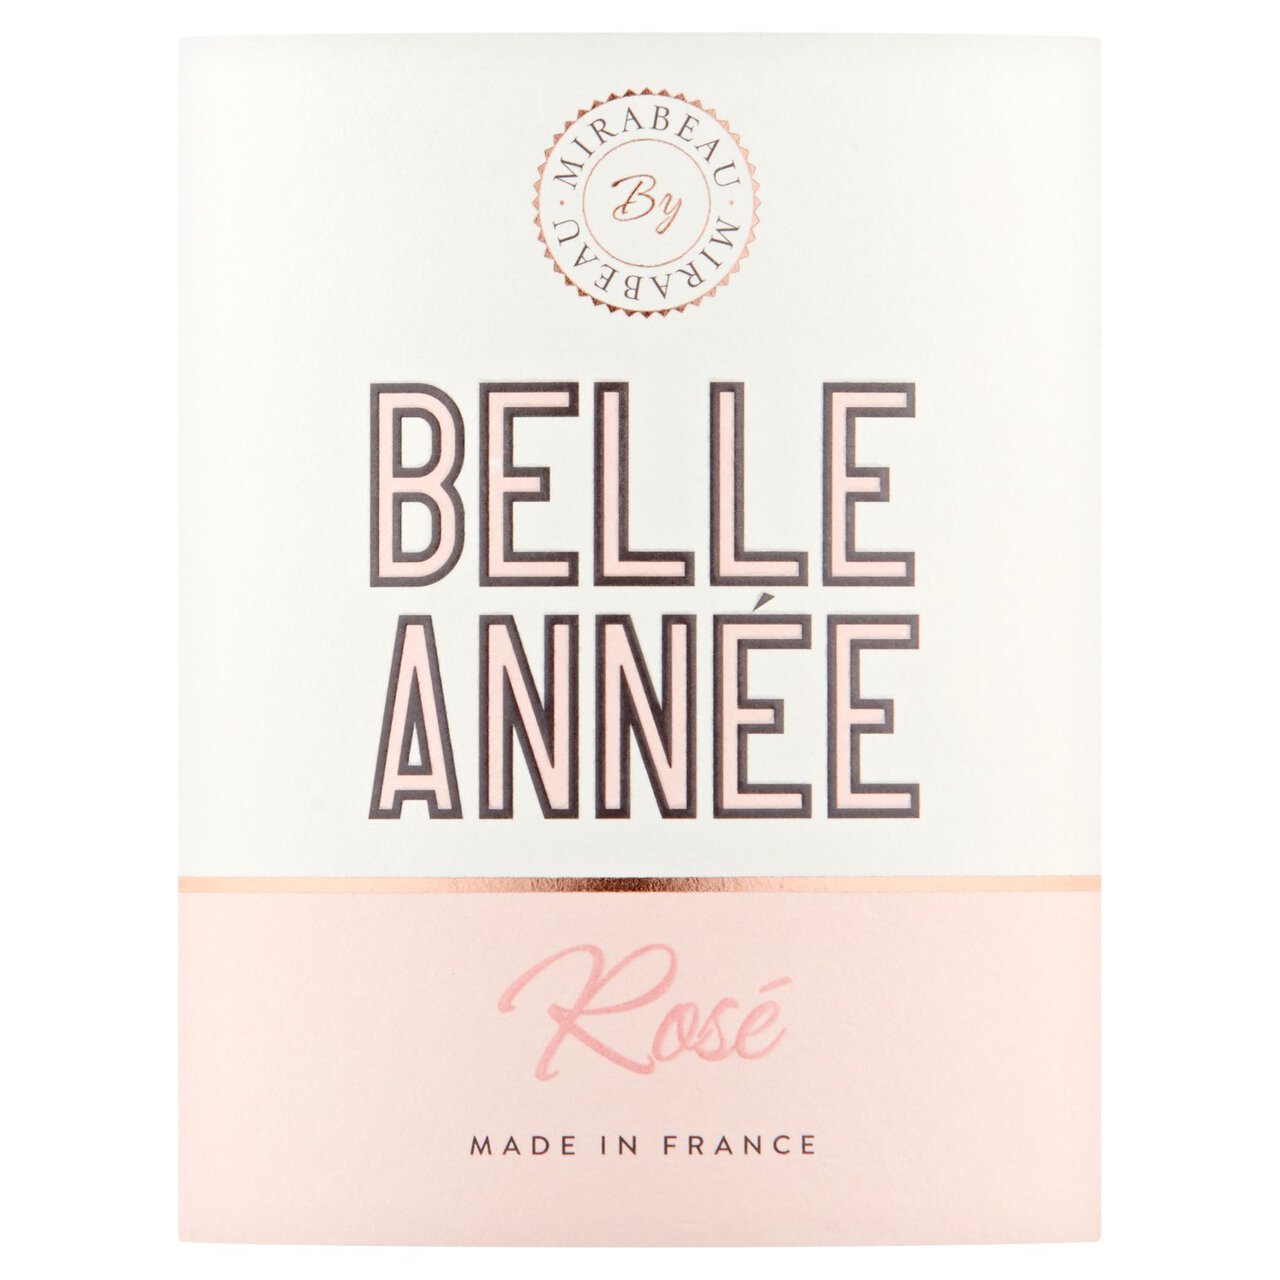 Mirabeau Belle Annee Provence Rose 75cl